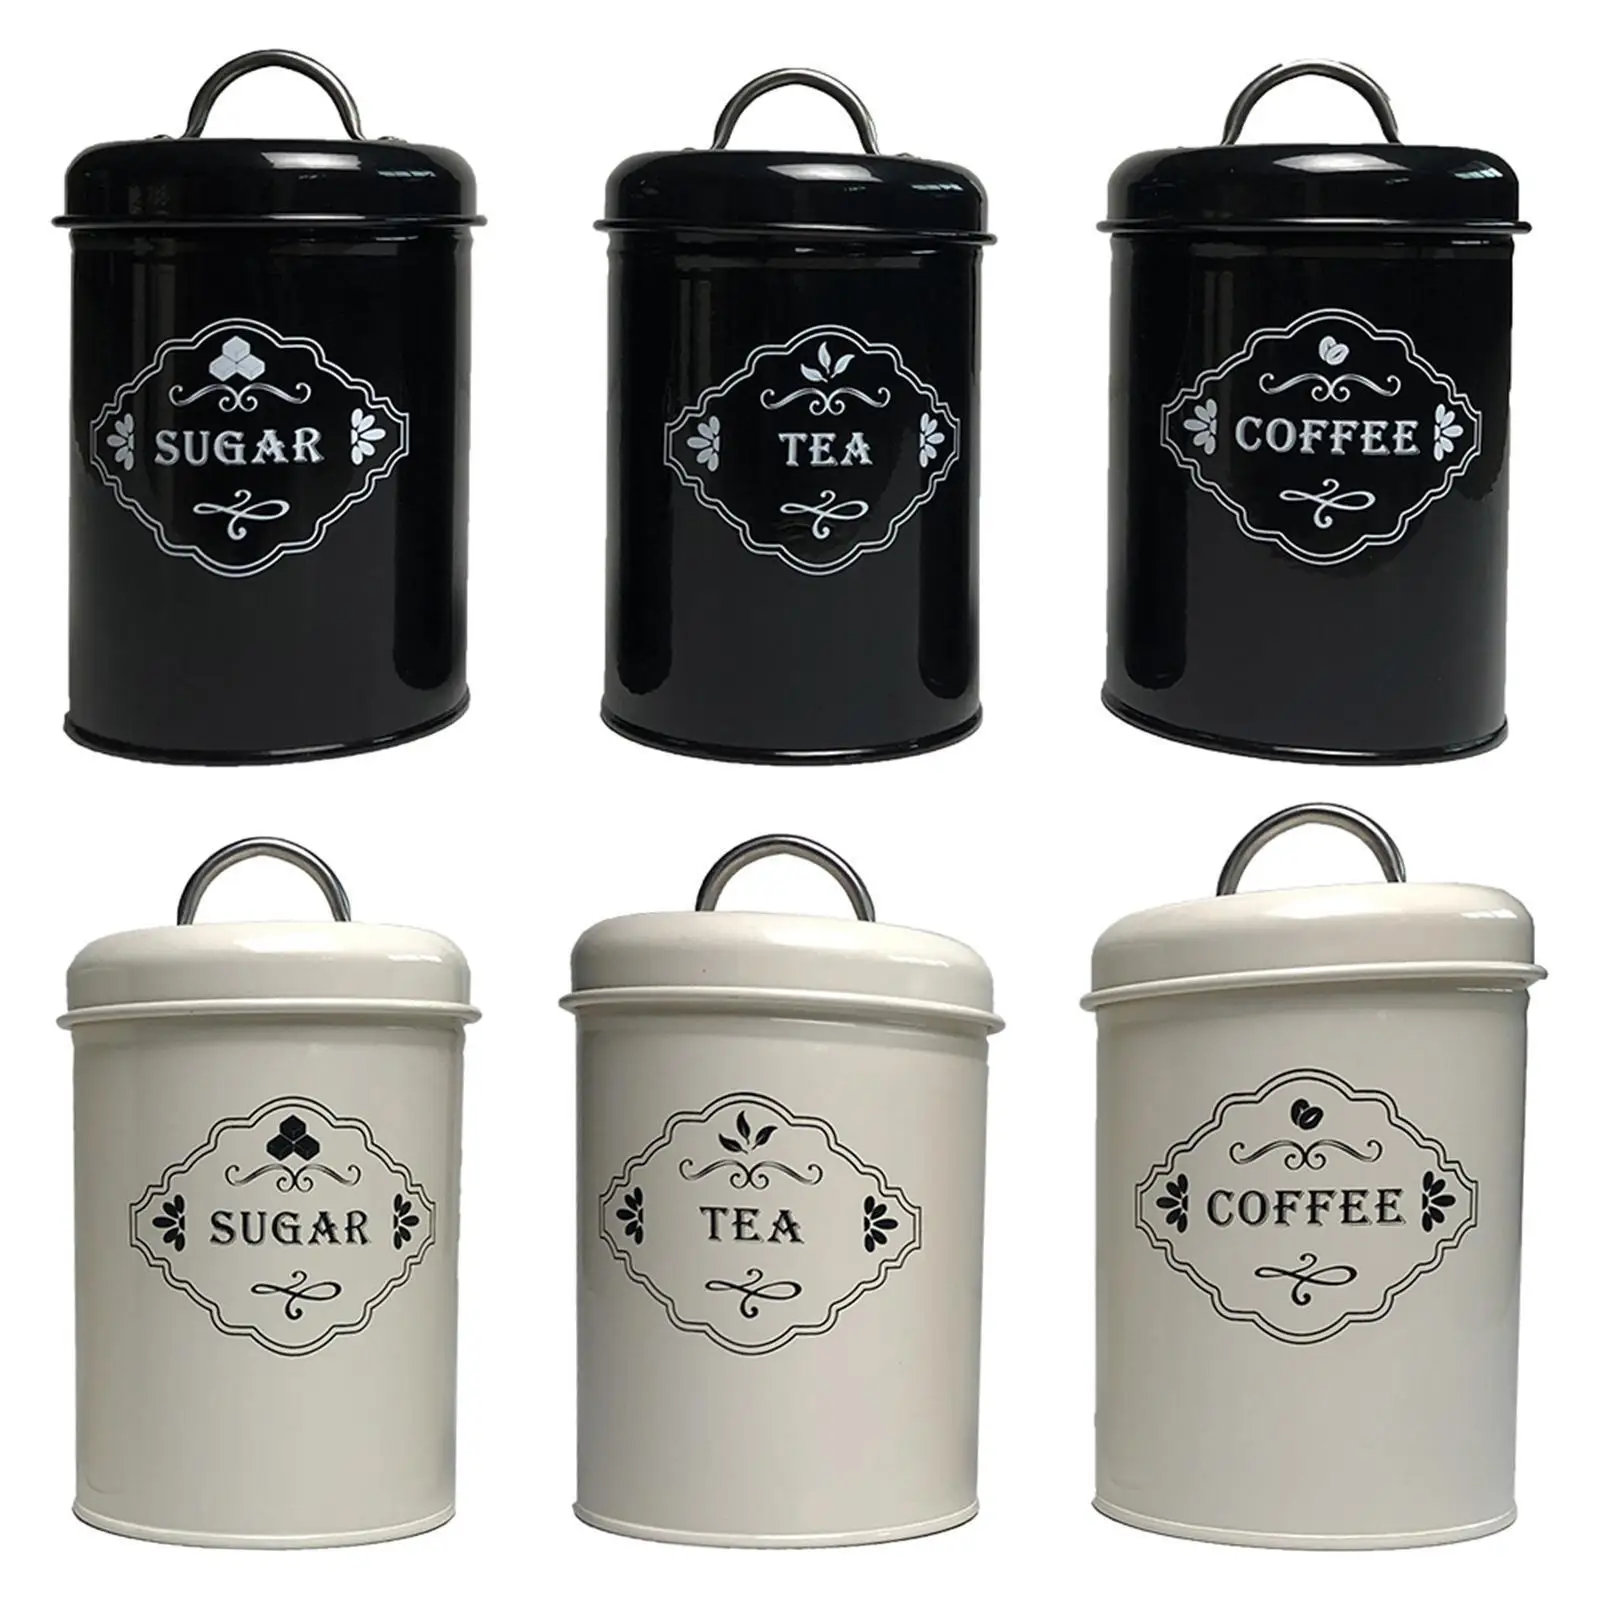 3pcs Tea Coffee Tin Canisters Kitchen Storage Pots Container